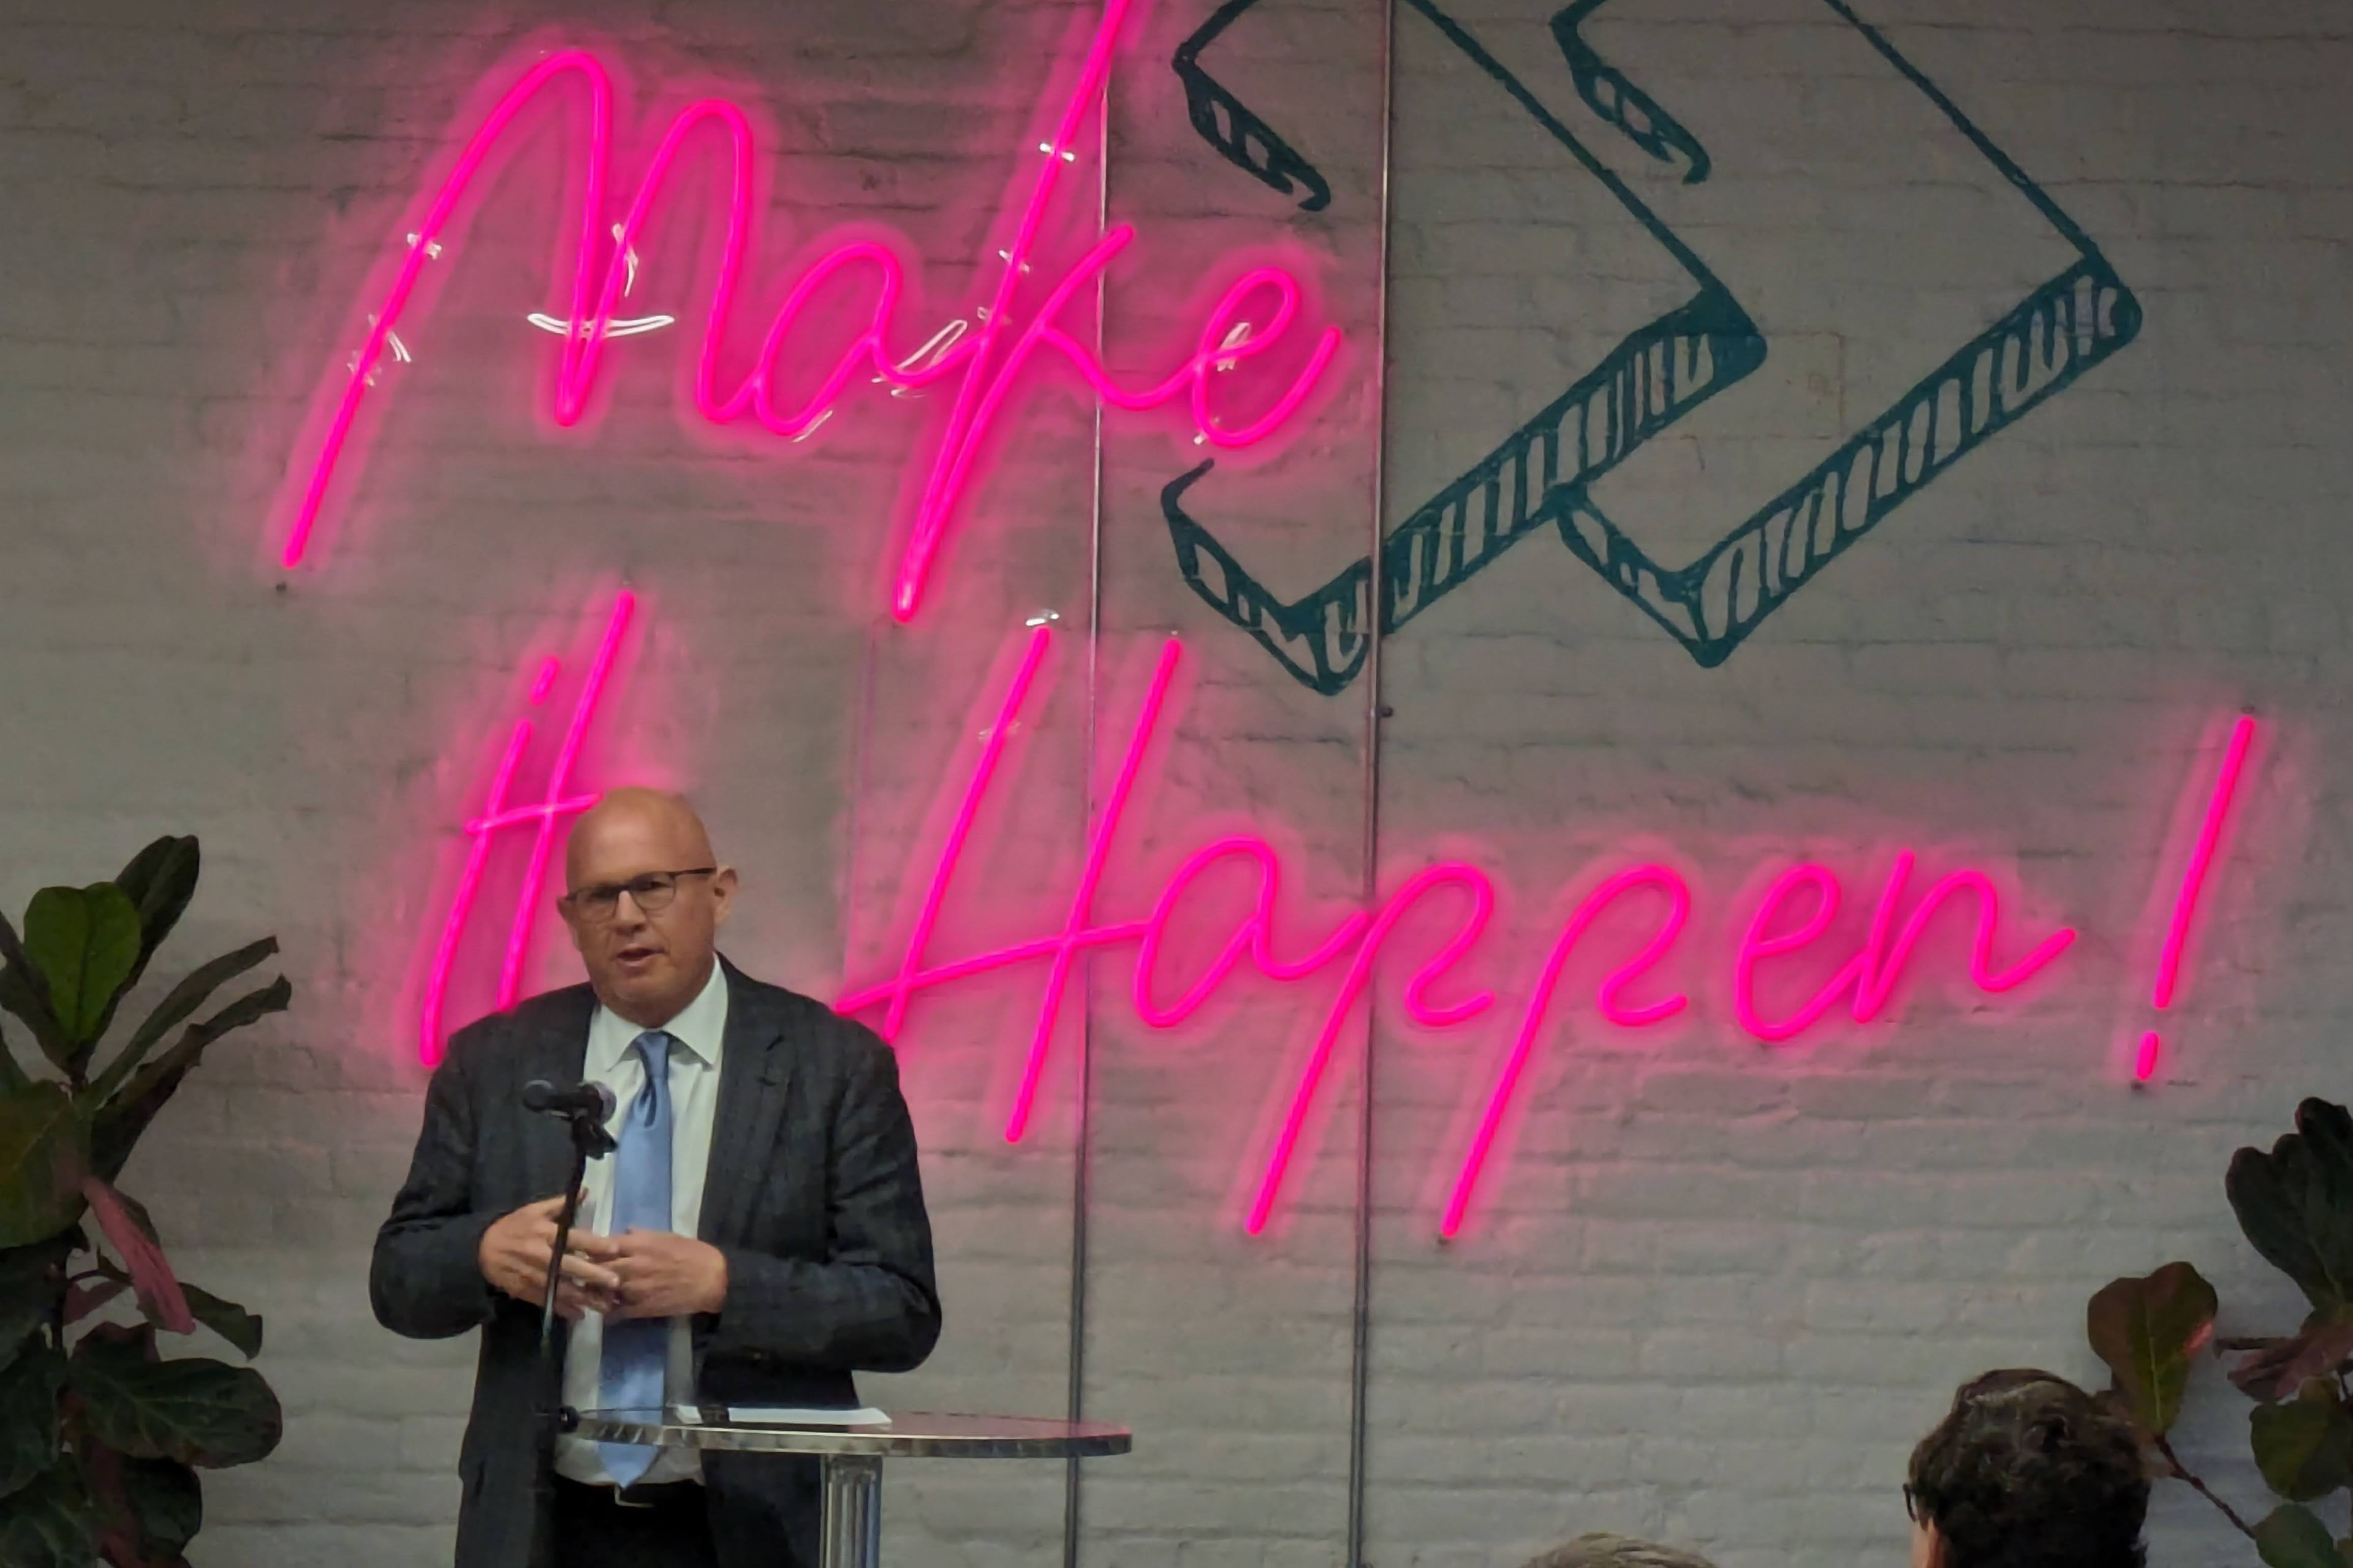 Stephen Loyd stands at a podium as he speaks at a convention. Behind him is a large, pink neon sign that reads, "Make it happen!"